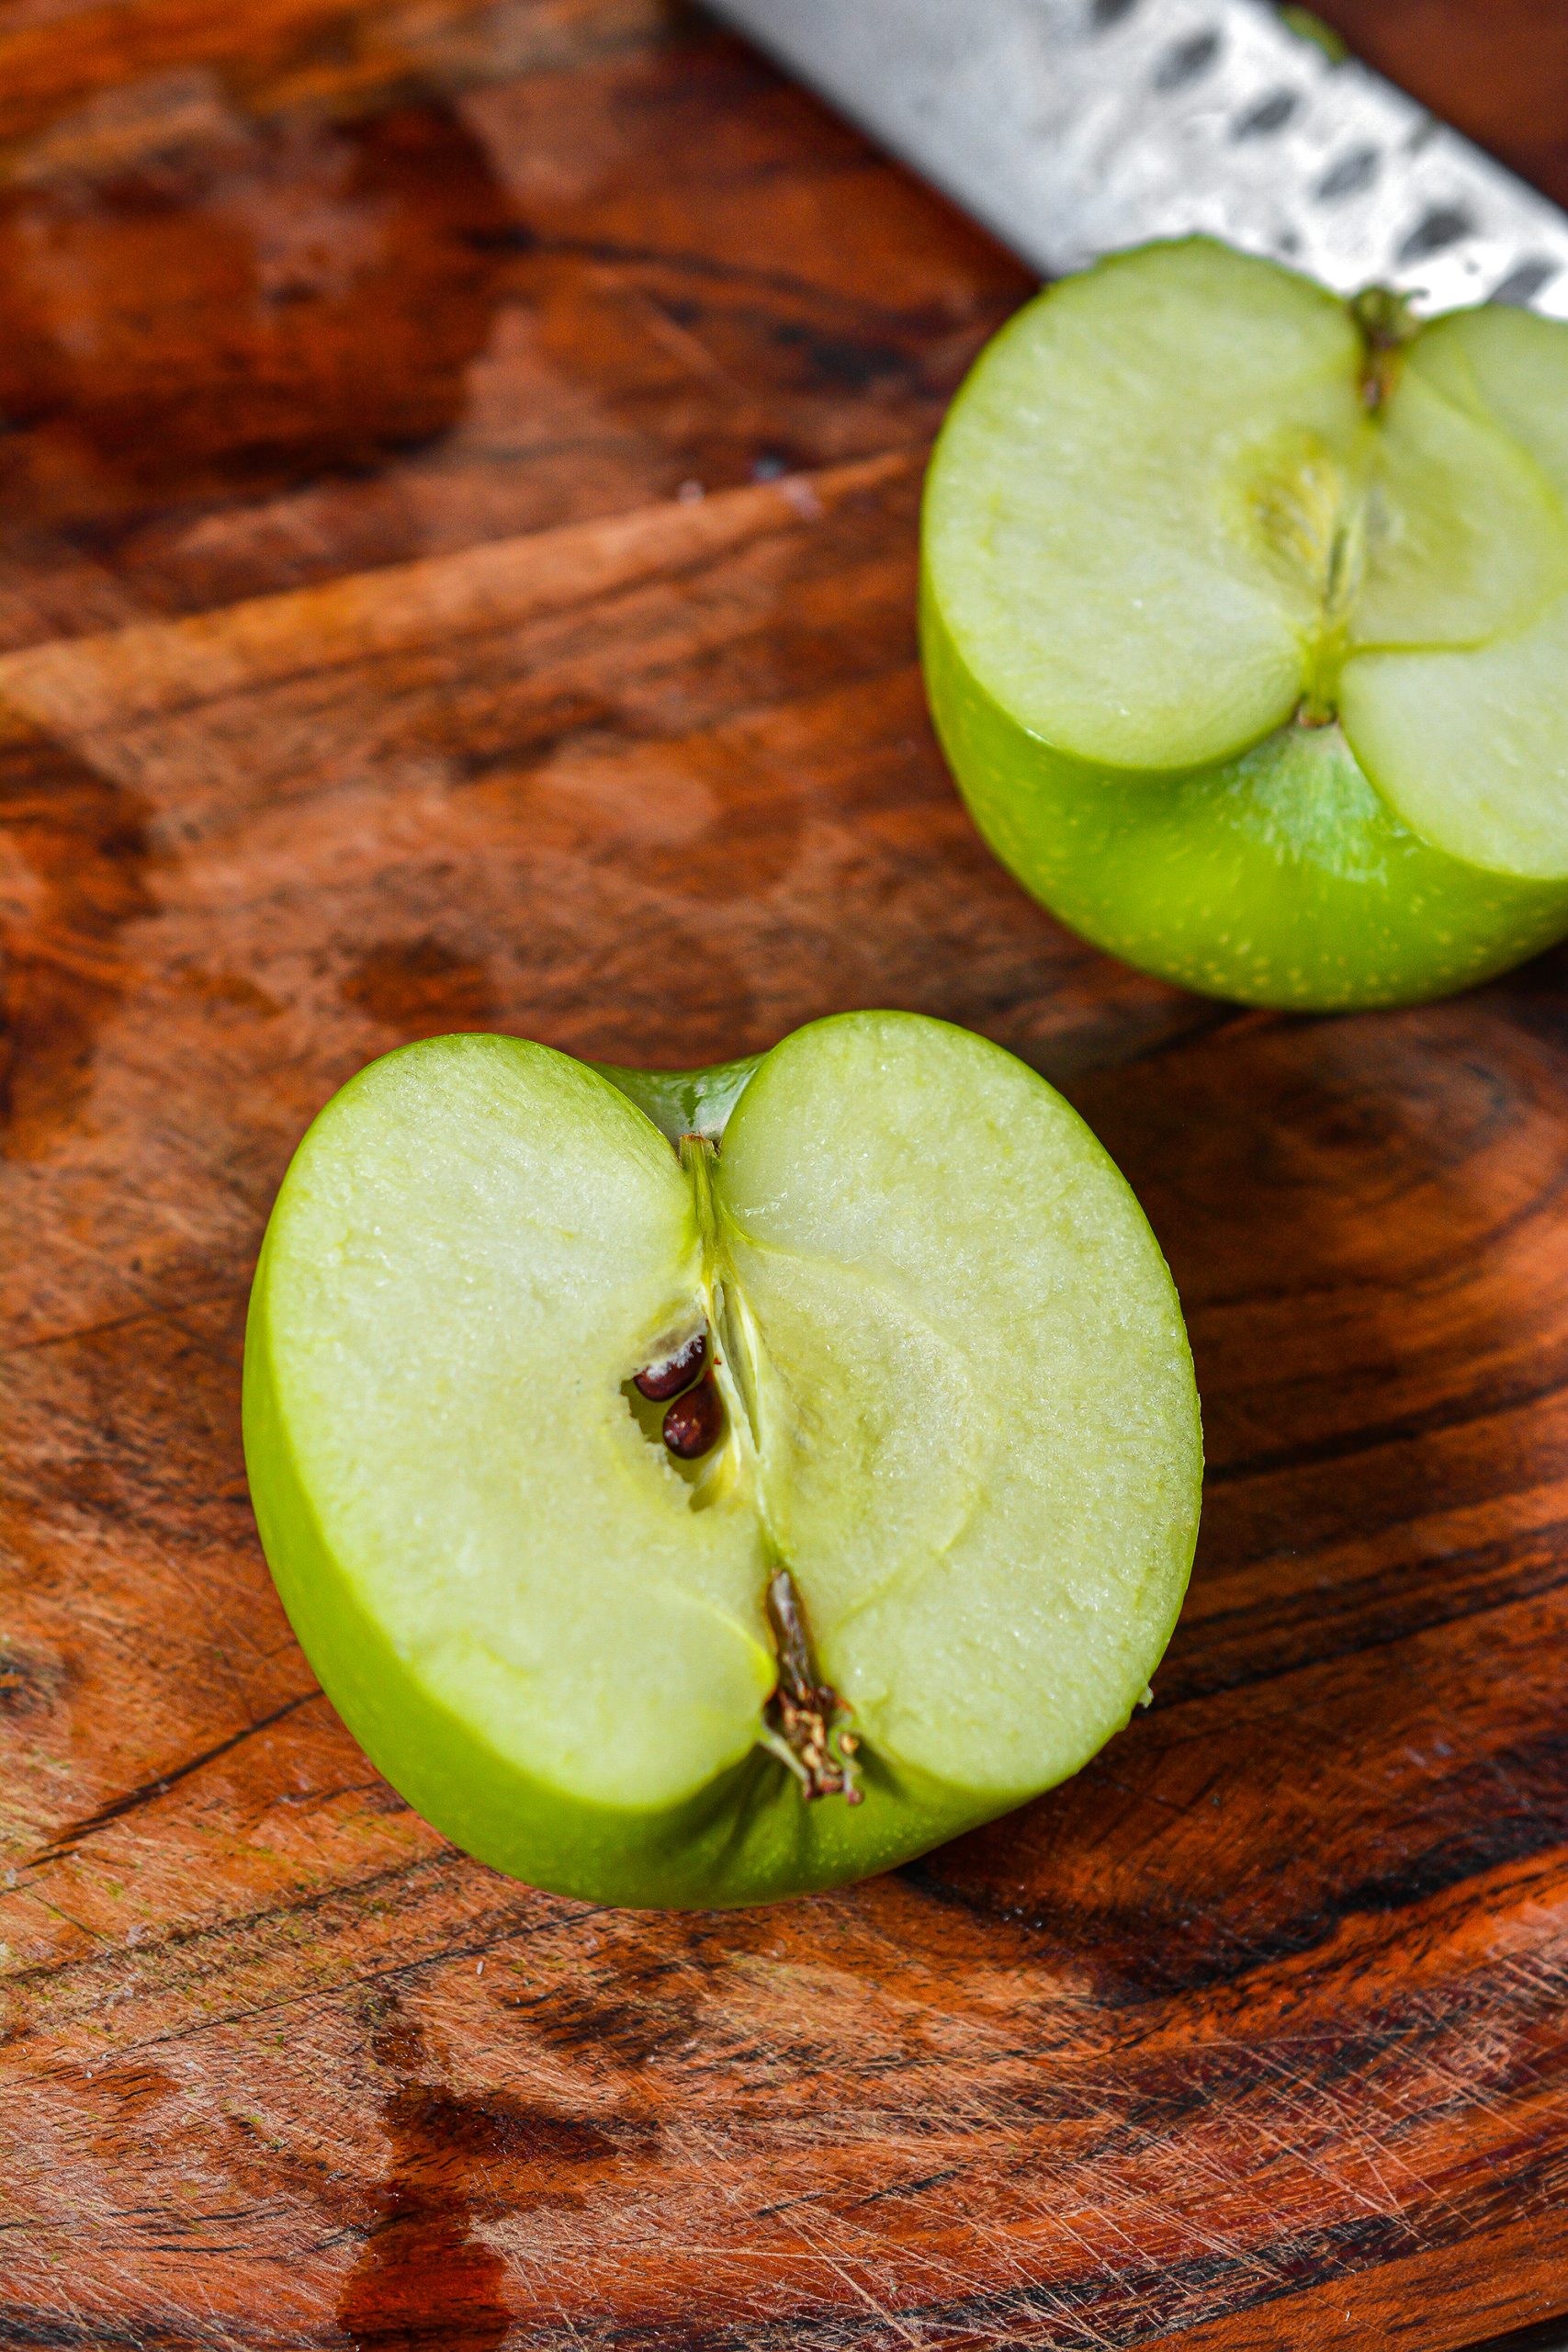 Cut each apple in half lengthwise. Use a spoon to core the apple and scoop out a hole in the middle of it.